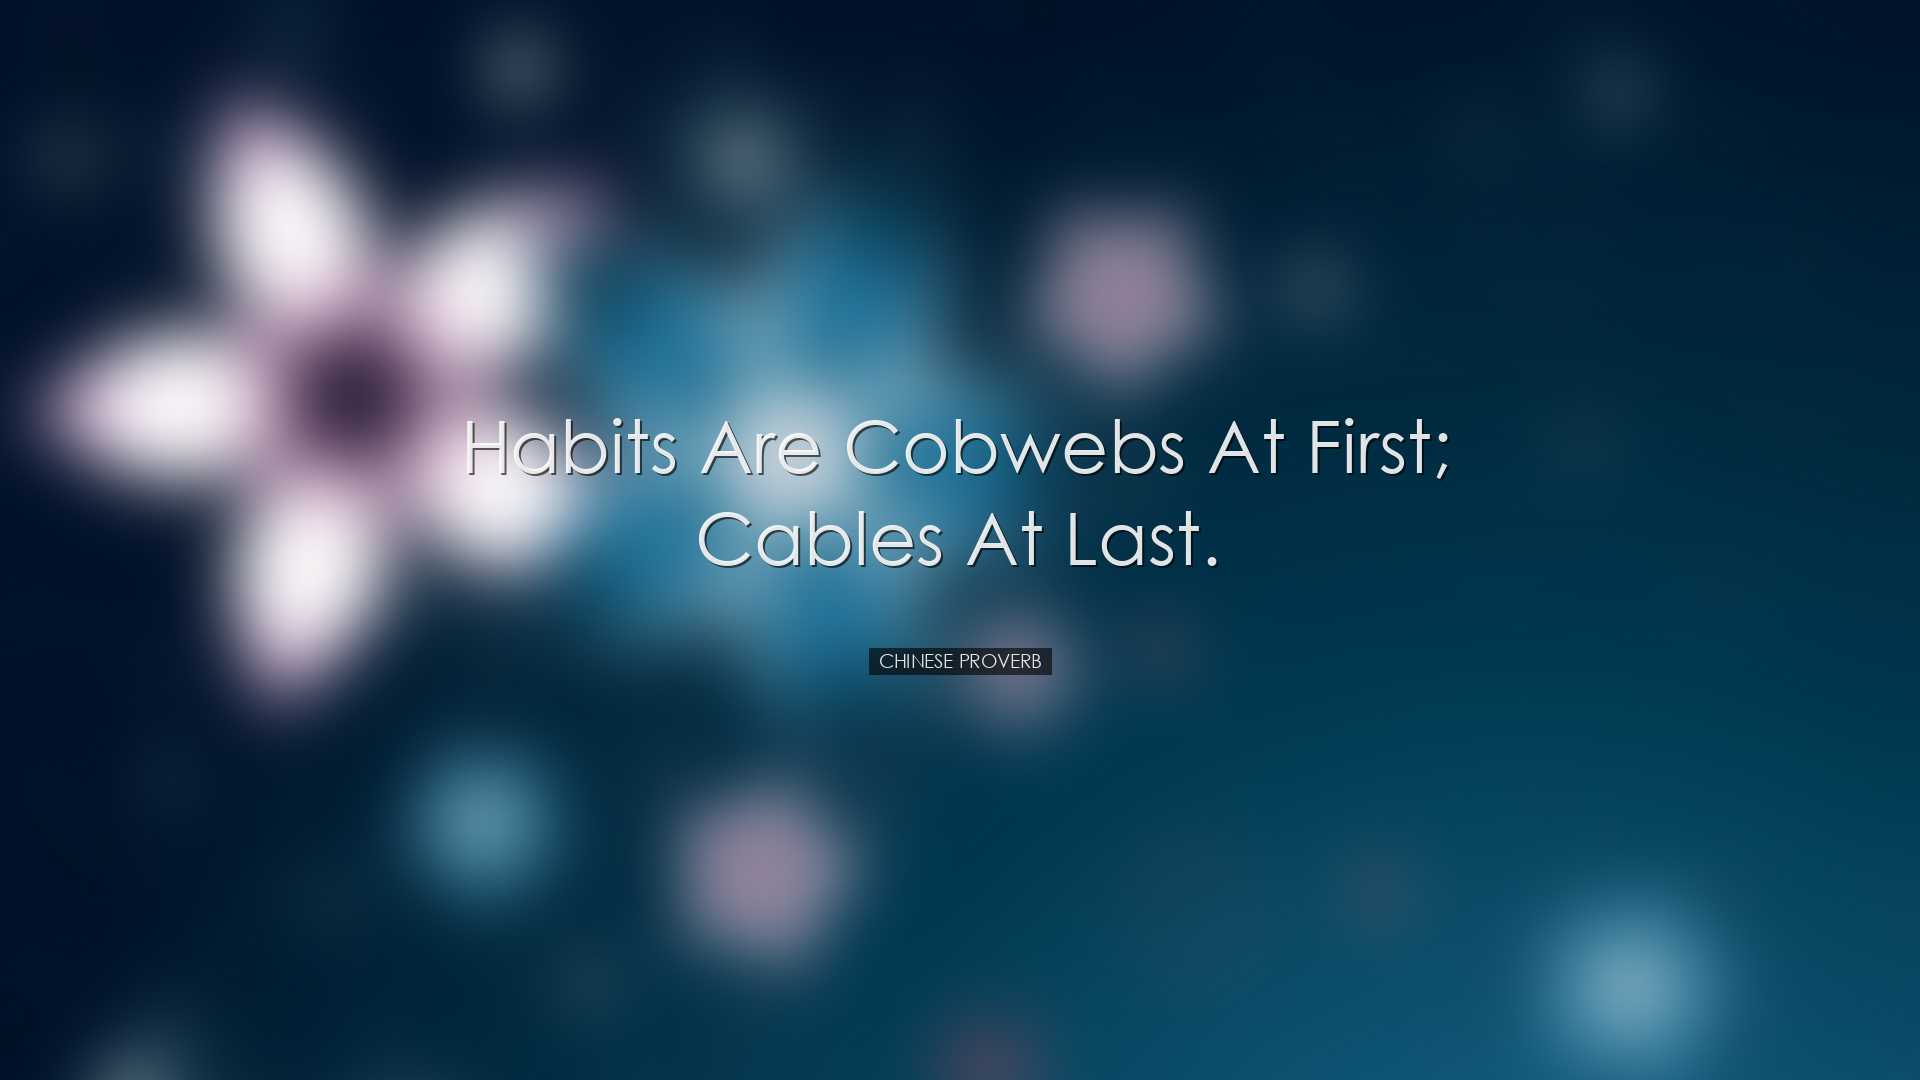 Habits are cobwebs at first; cables at last. - Chinese Proverb